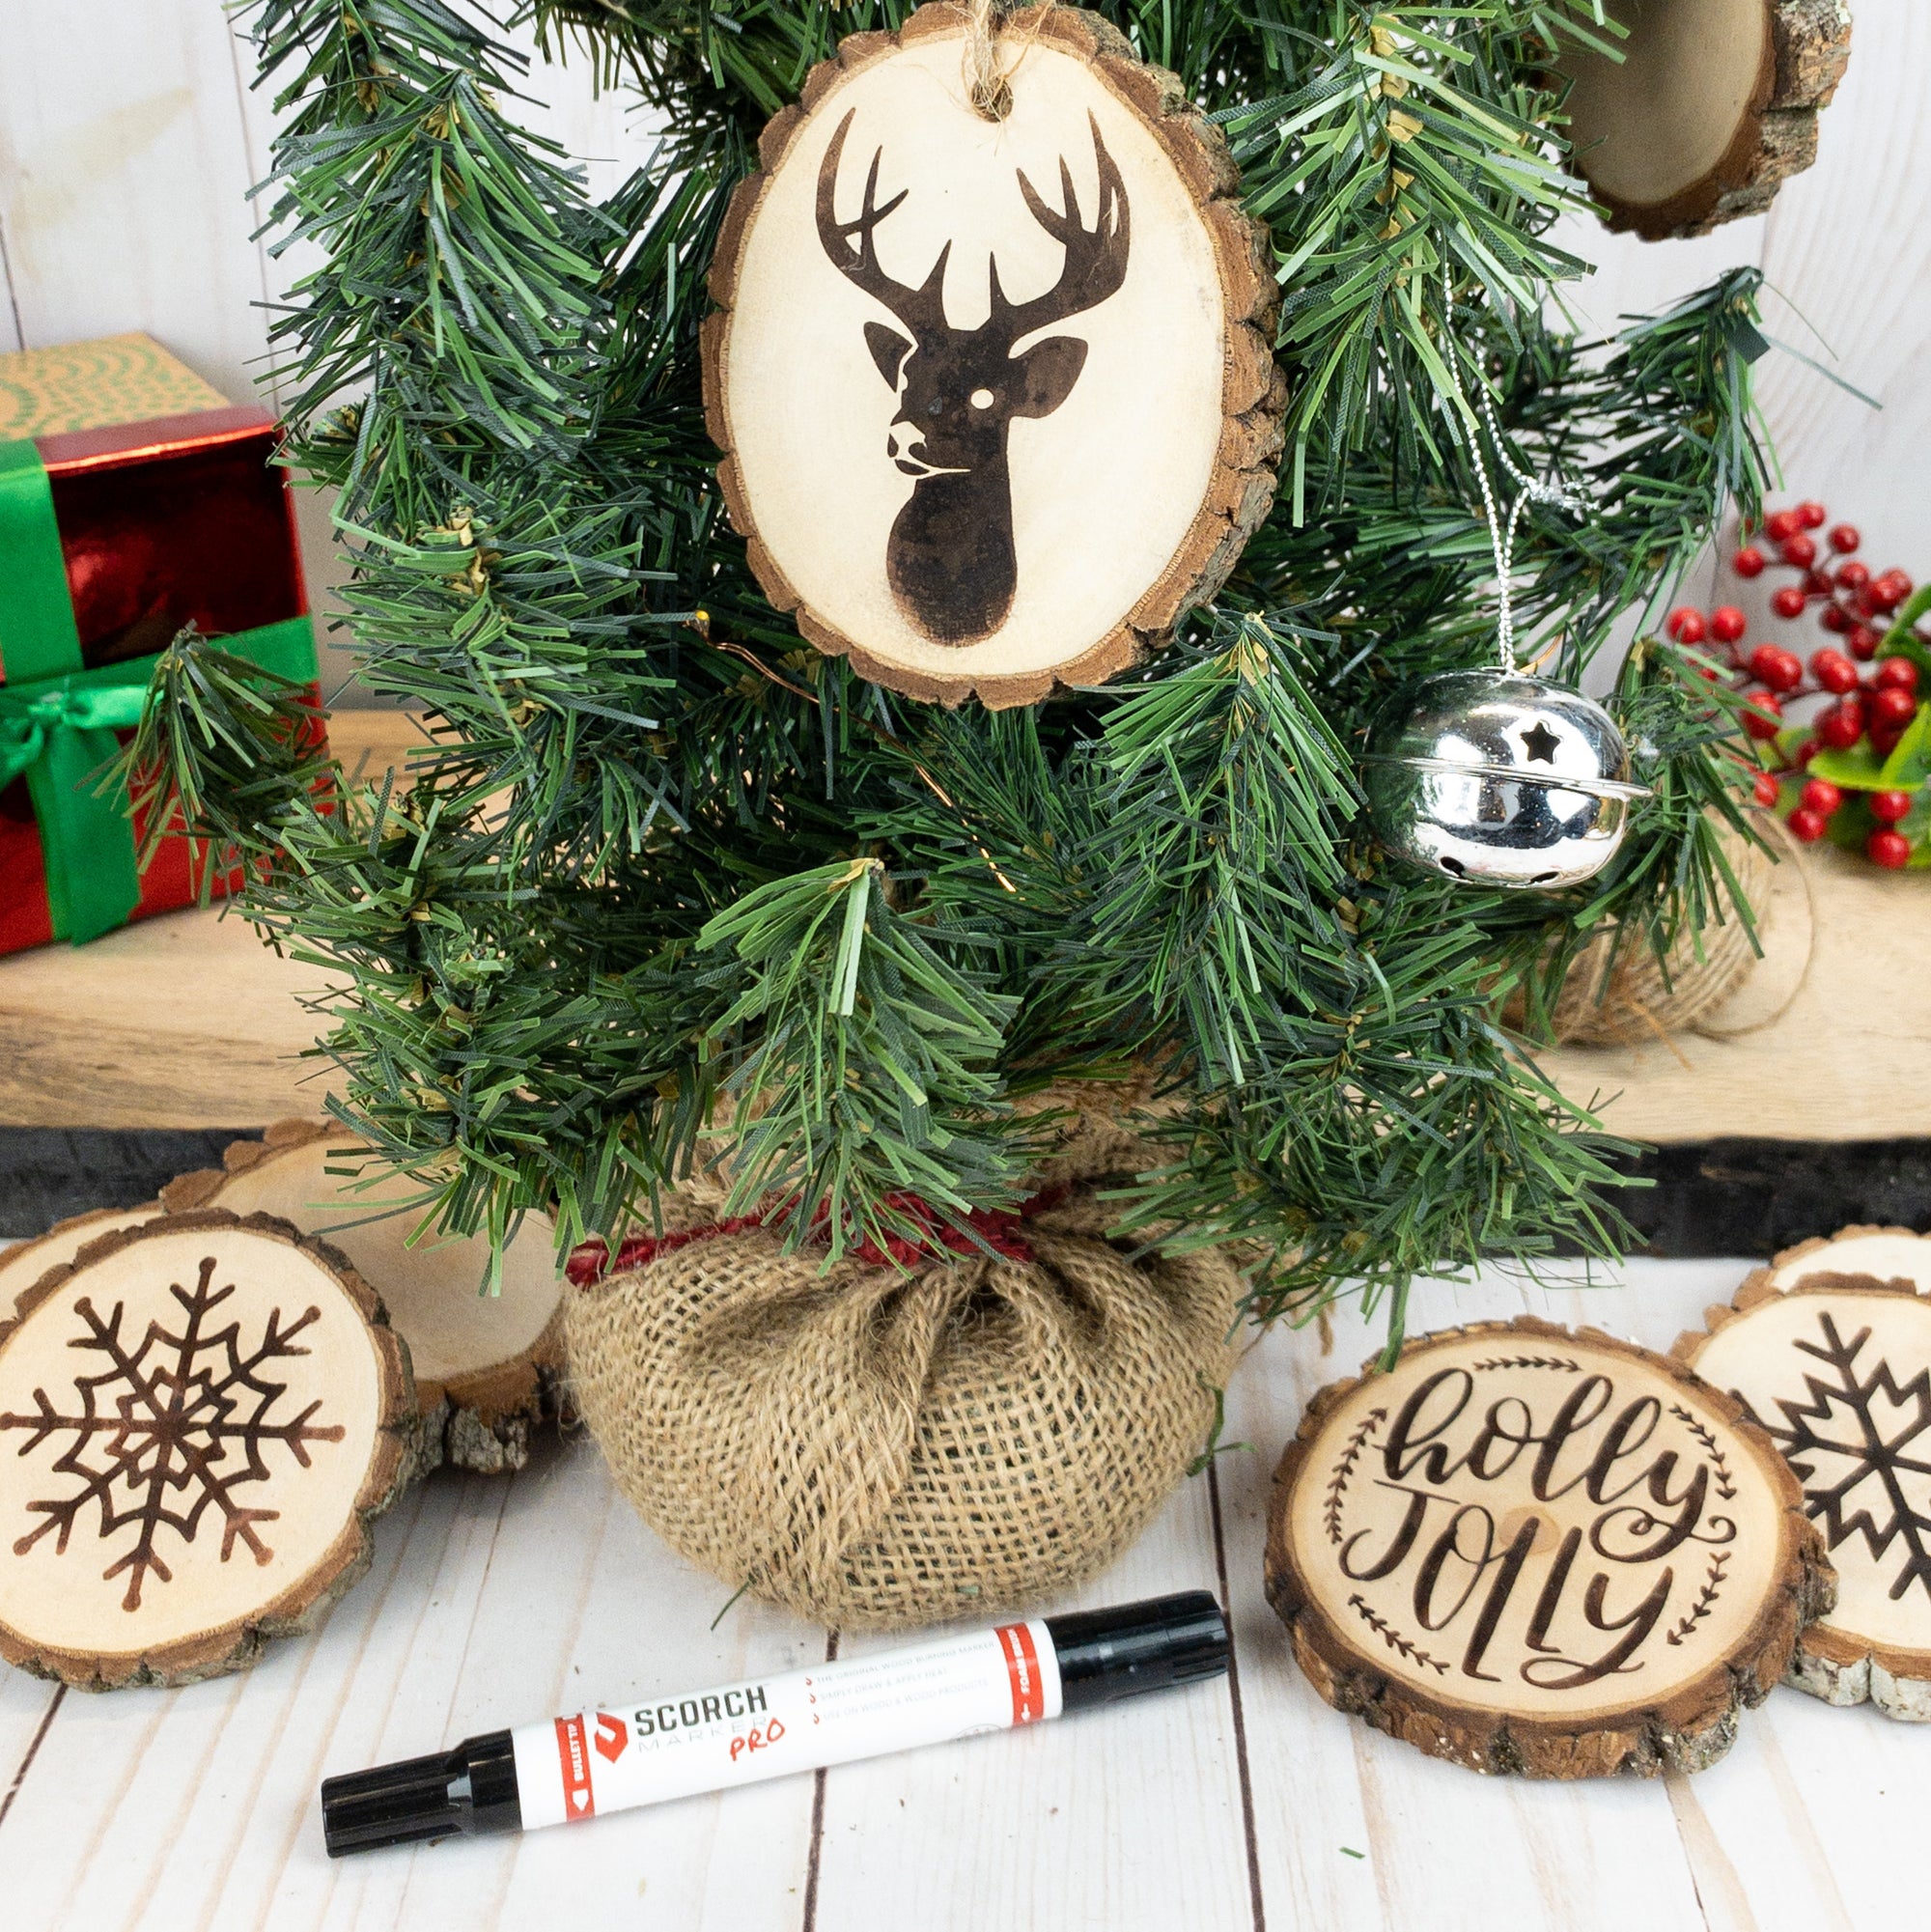 5 Fun Christmas Crafts to Make with Your Scorch Marker